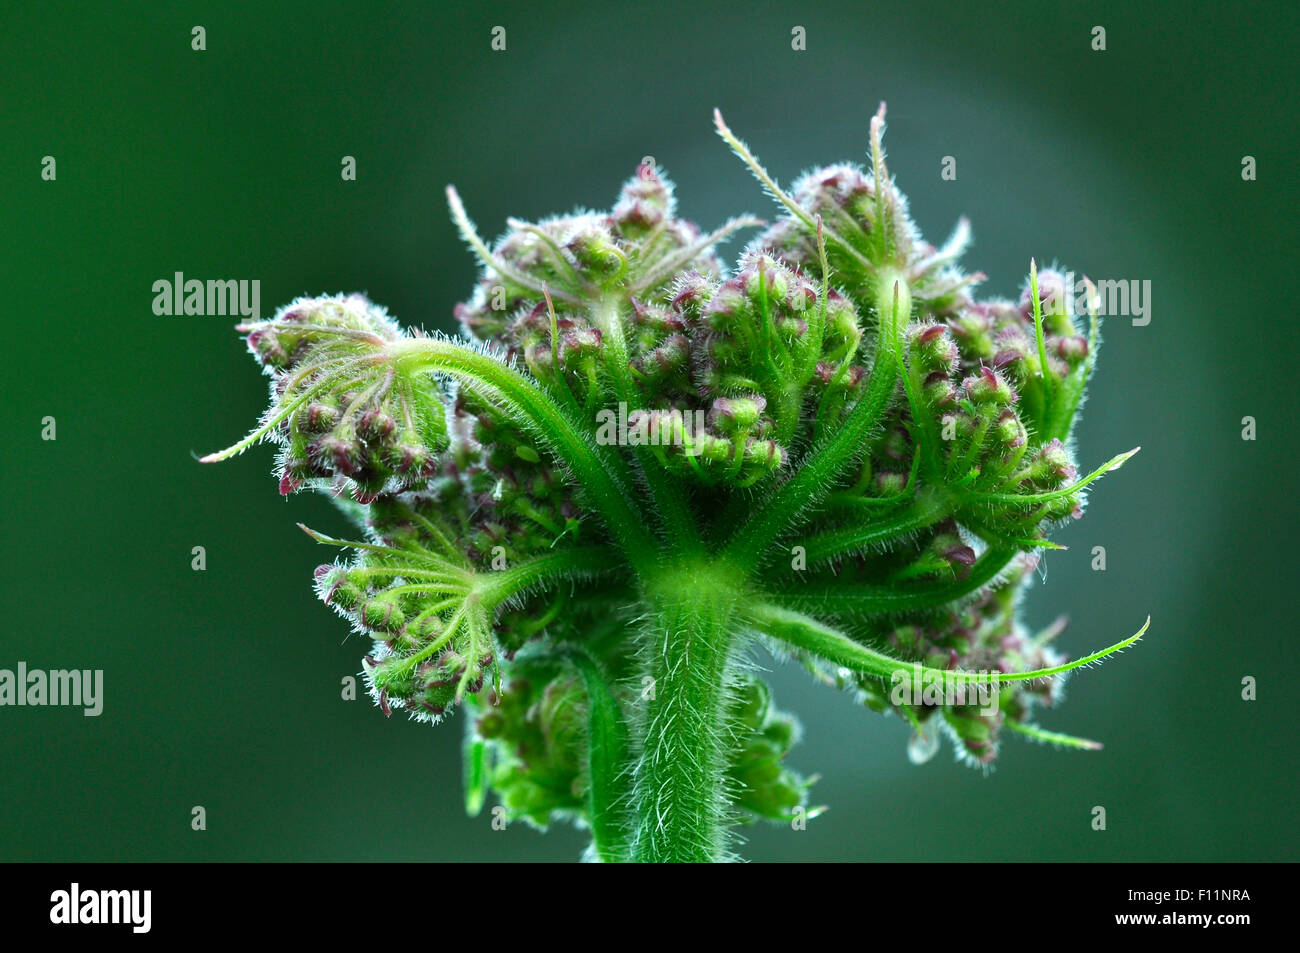 A hogweed flower in its early stages UK Stock Photo